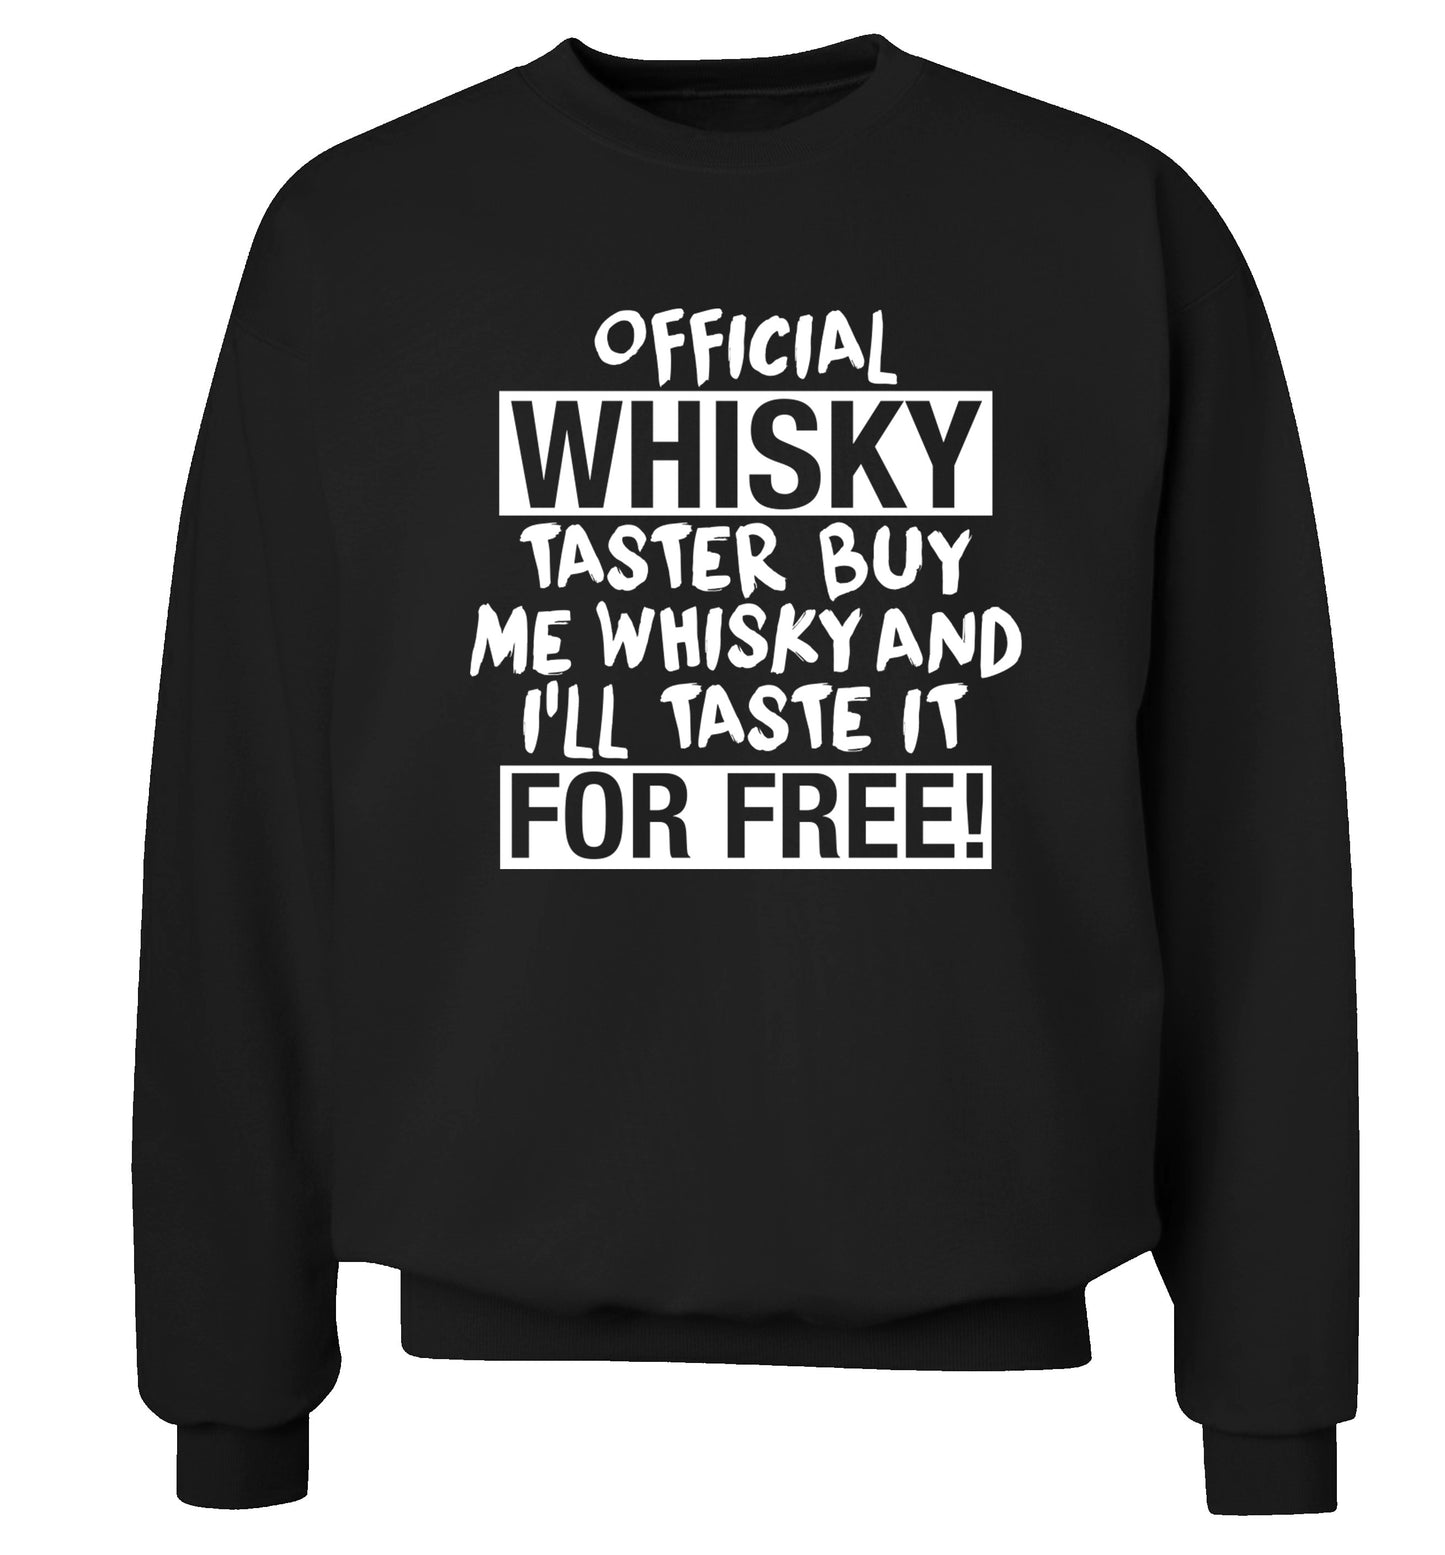 Official whisky taster buy me whisky and I'll taste it for free Adult's unisex black Sweater 2XL